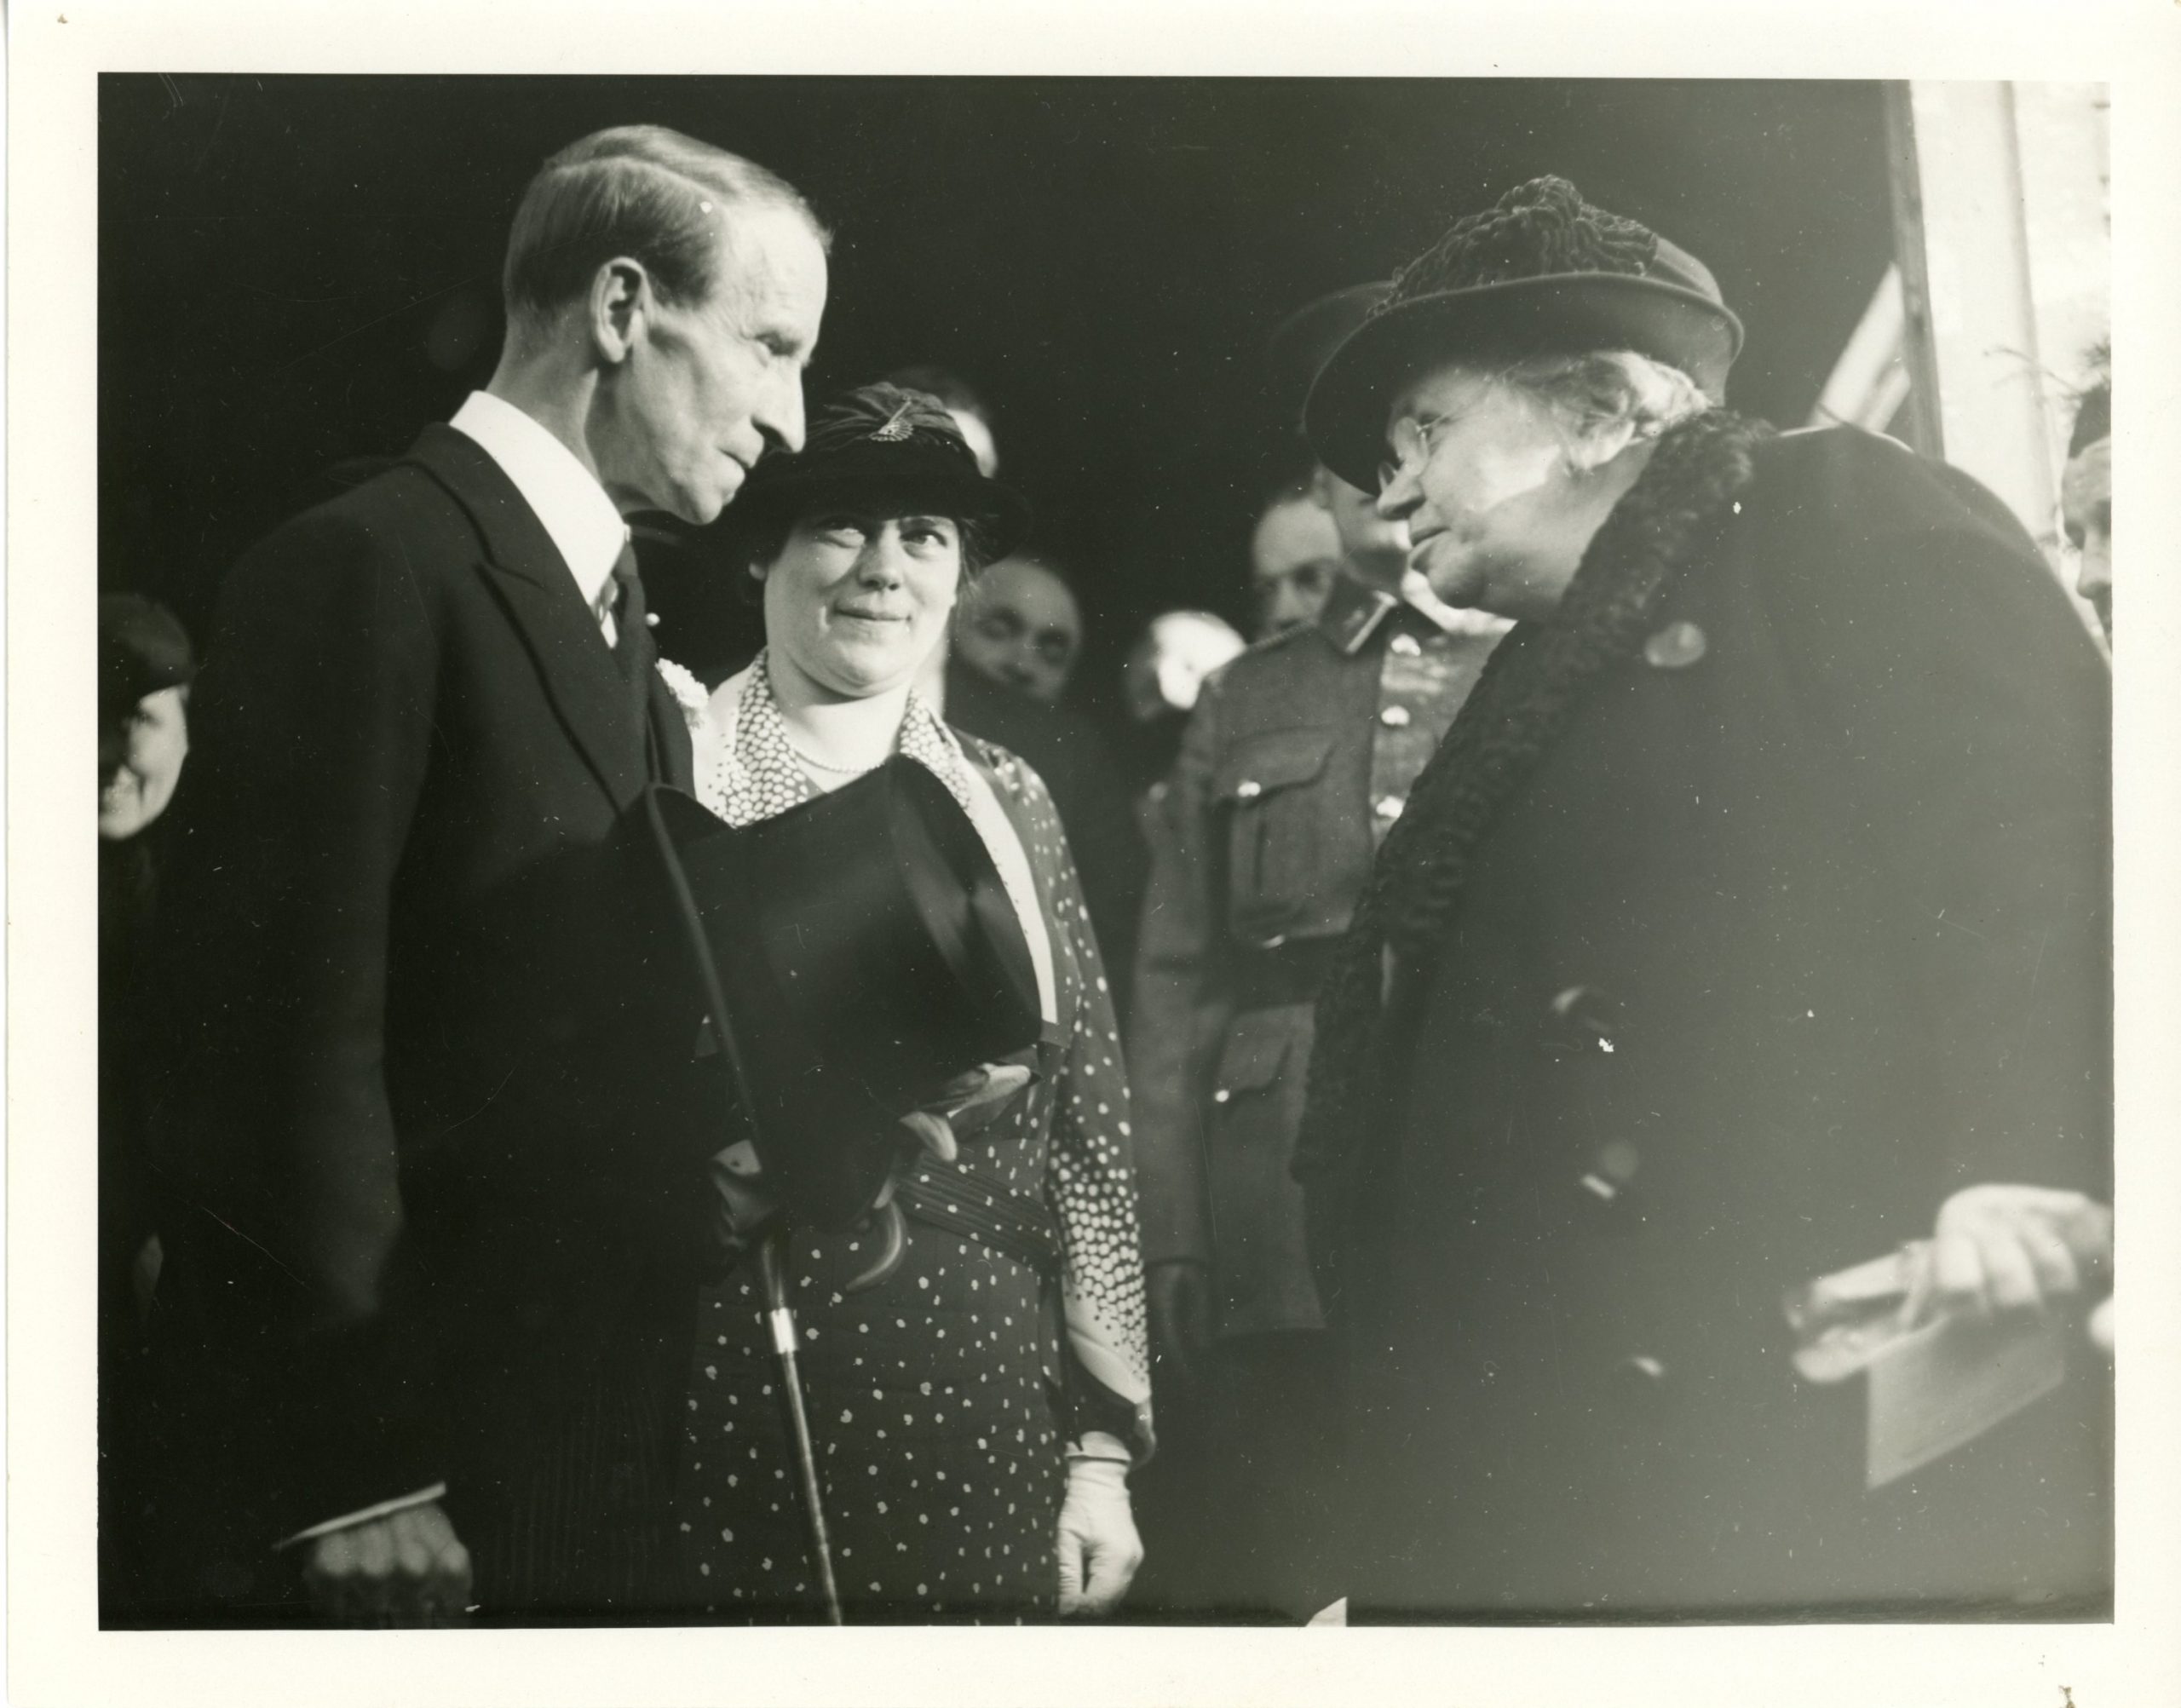 Black and white photograph of Maude Abbott and Lord Tweedsmuir during the Sir John Joseph Caldwell Abbott memorial dedication ceremony in 1936. Lord Tweedsmuir, on the left, is seen in profile. He has short hair, parted on the side, and is wearing a black jacket. He is exchanging glances with Maude Abbott, on the right in the photo. She is elderly and is wearing a black coat with a fur collar. Behind Lord Tweedsmuir, a woman in a dark dress with white polka dots and a stylish hat is looking at him attentively. The crowd can be seen behind them.